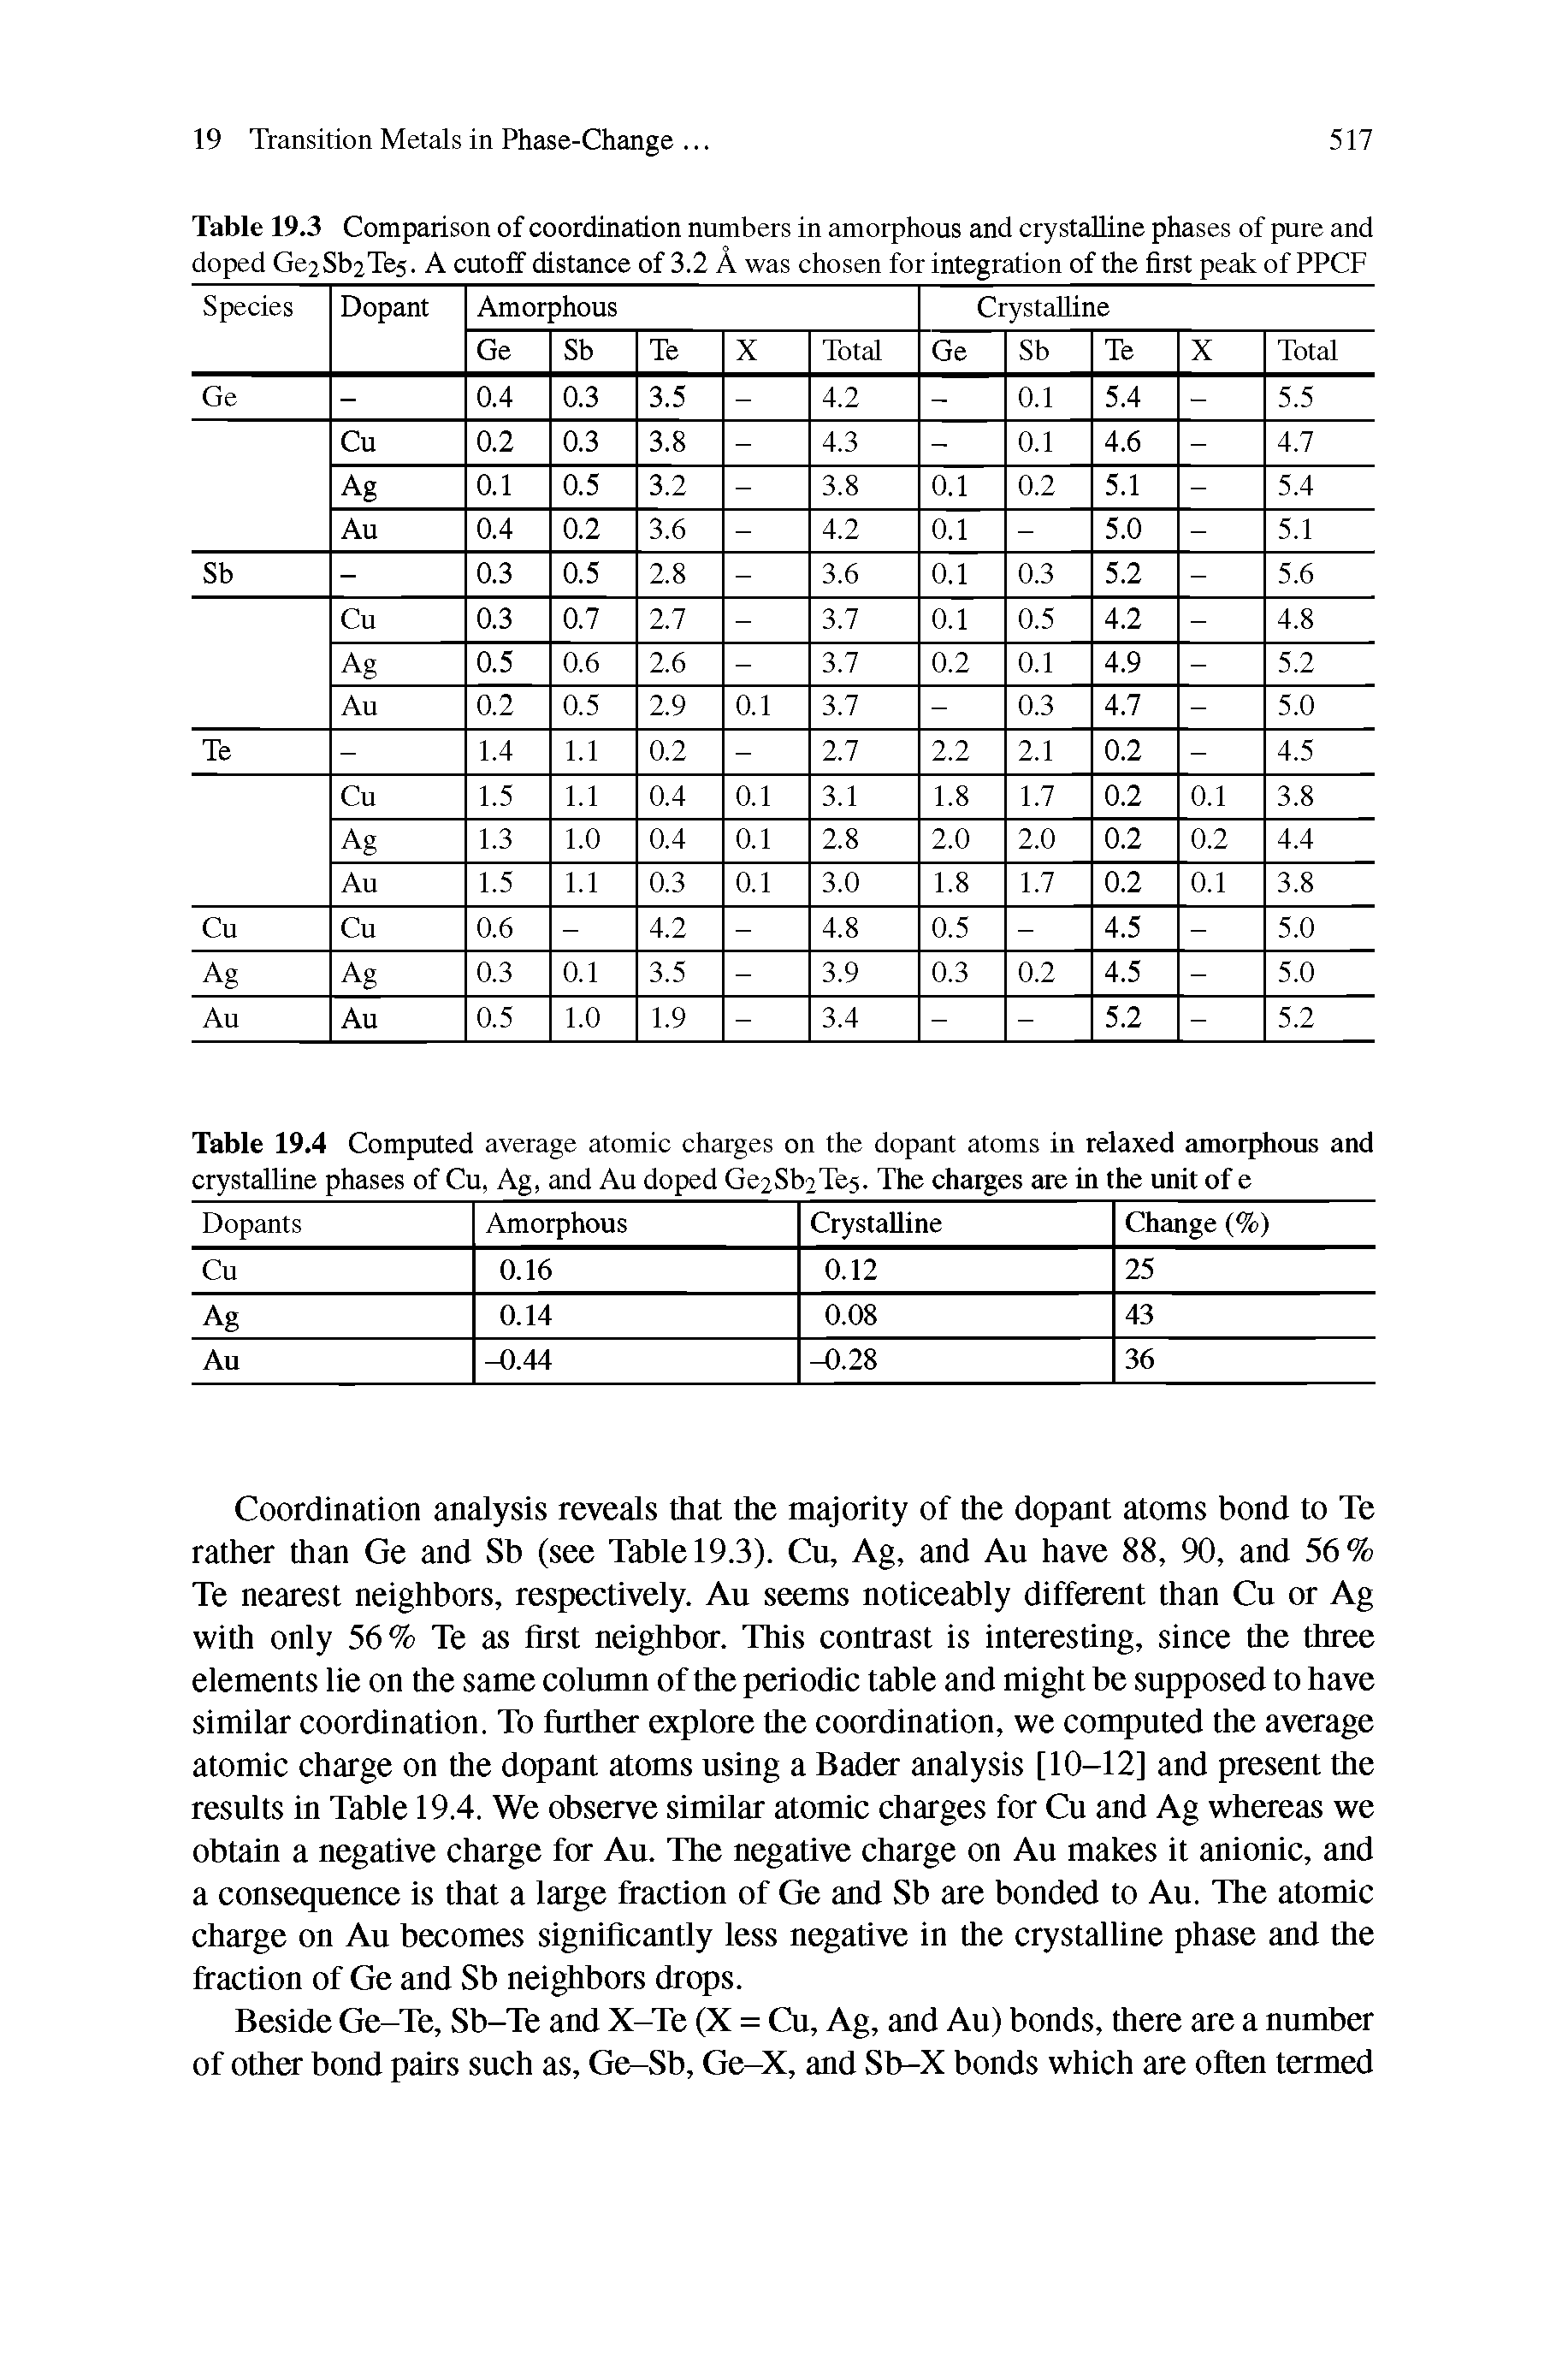 Table 19.4 Computed average atomic charges on the dopant atoms in relaxed amorphous and crystalline phases of Cu, Ag, and Au doped Ge2Sb2Te5. The charges are in the unit of e...